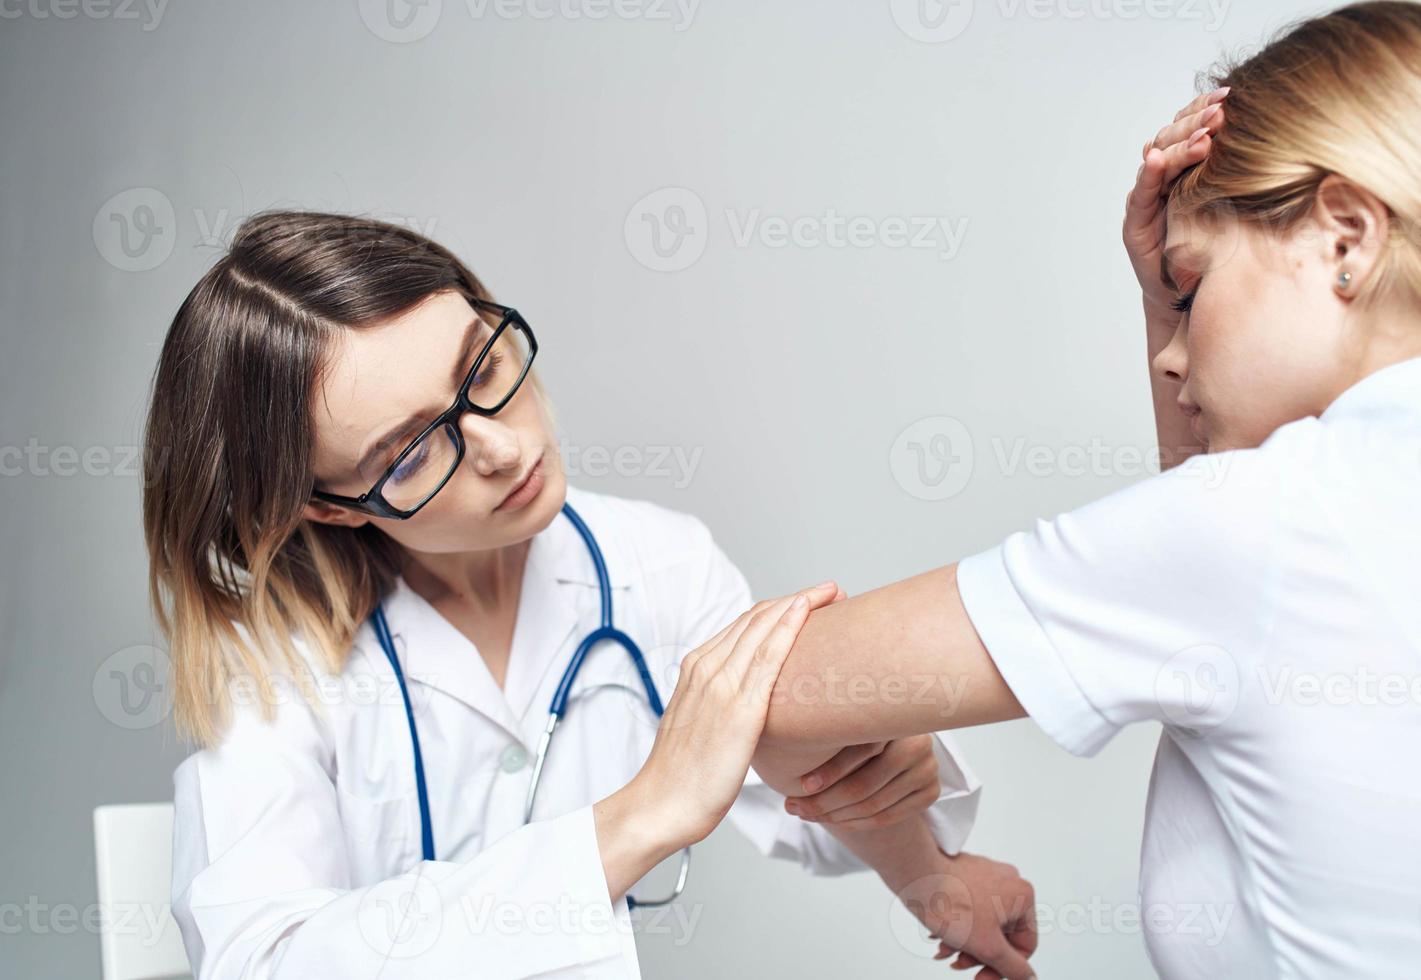 Doctor sits on a chair and woman patient indoors on a light background cropped view photo